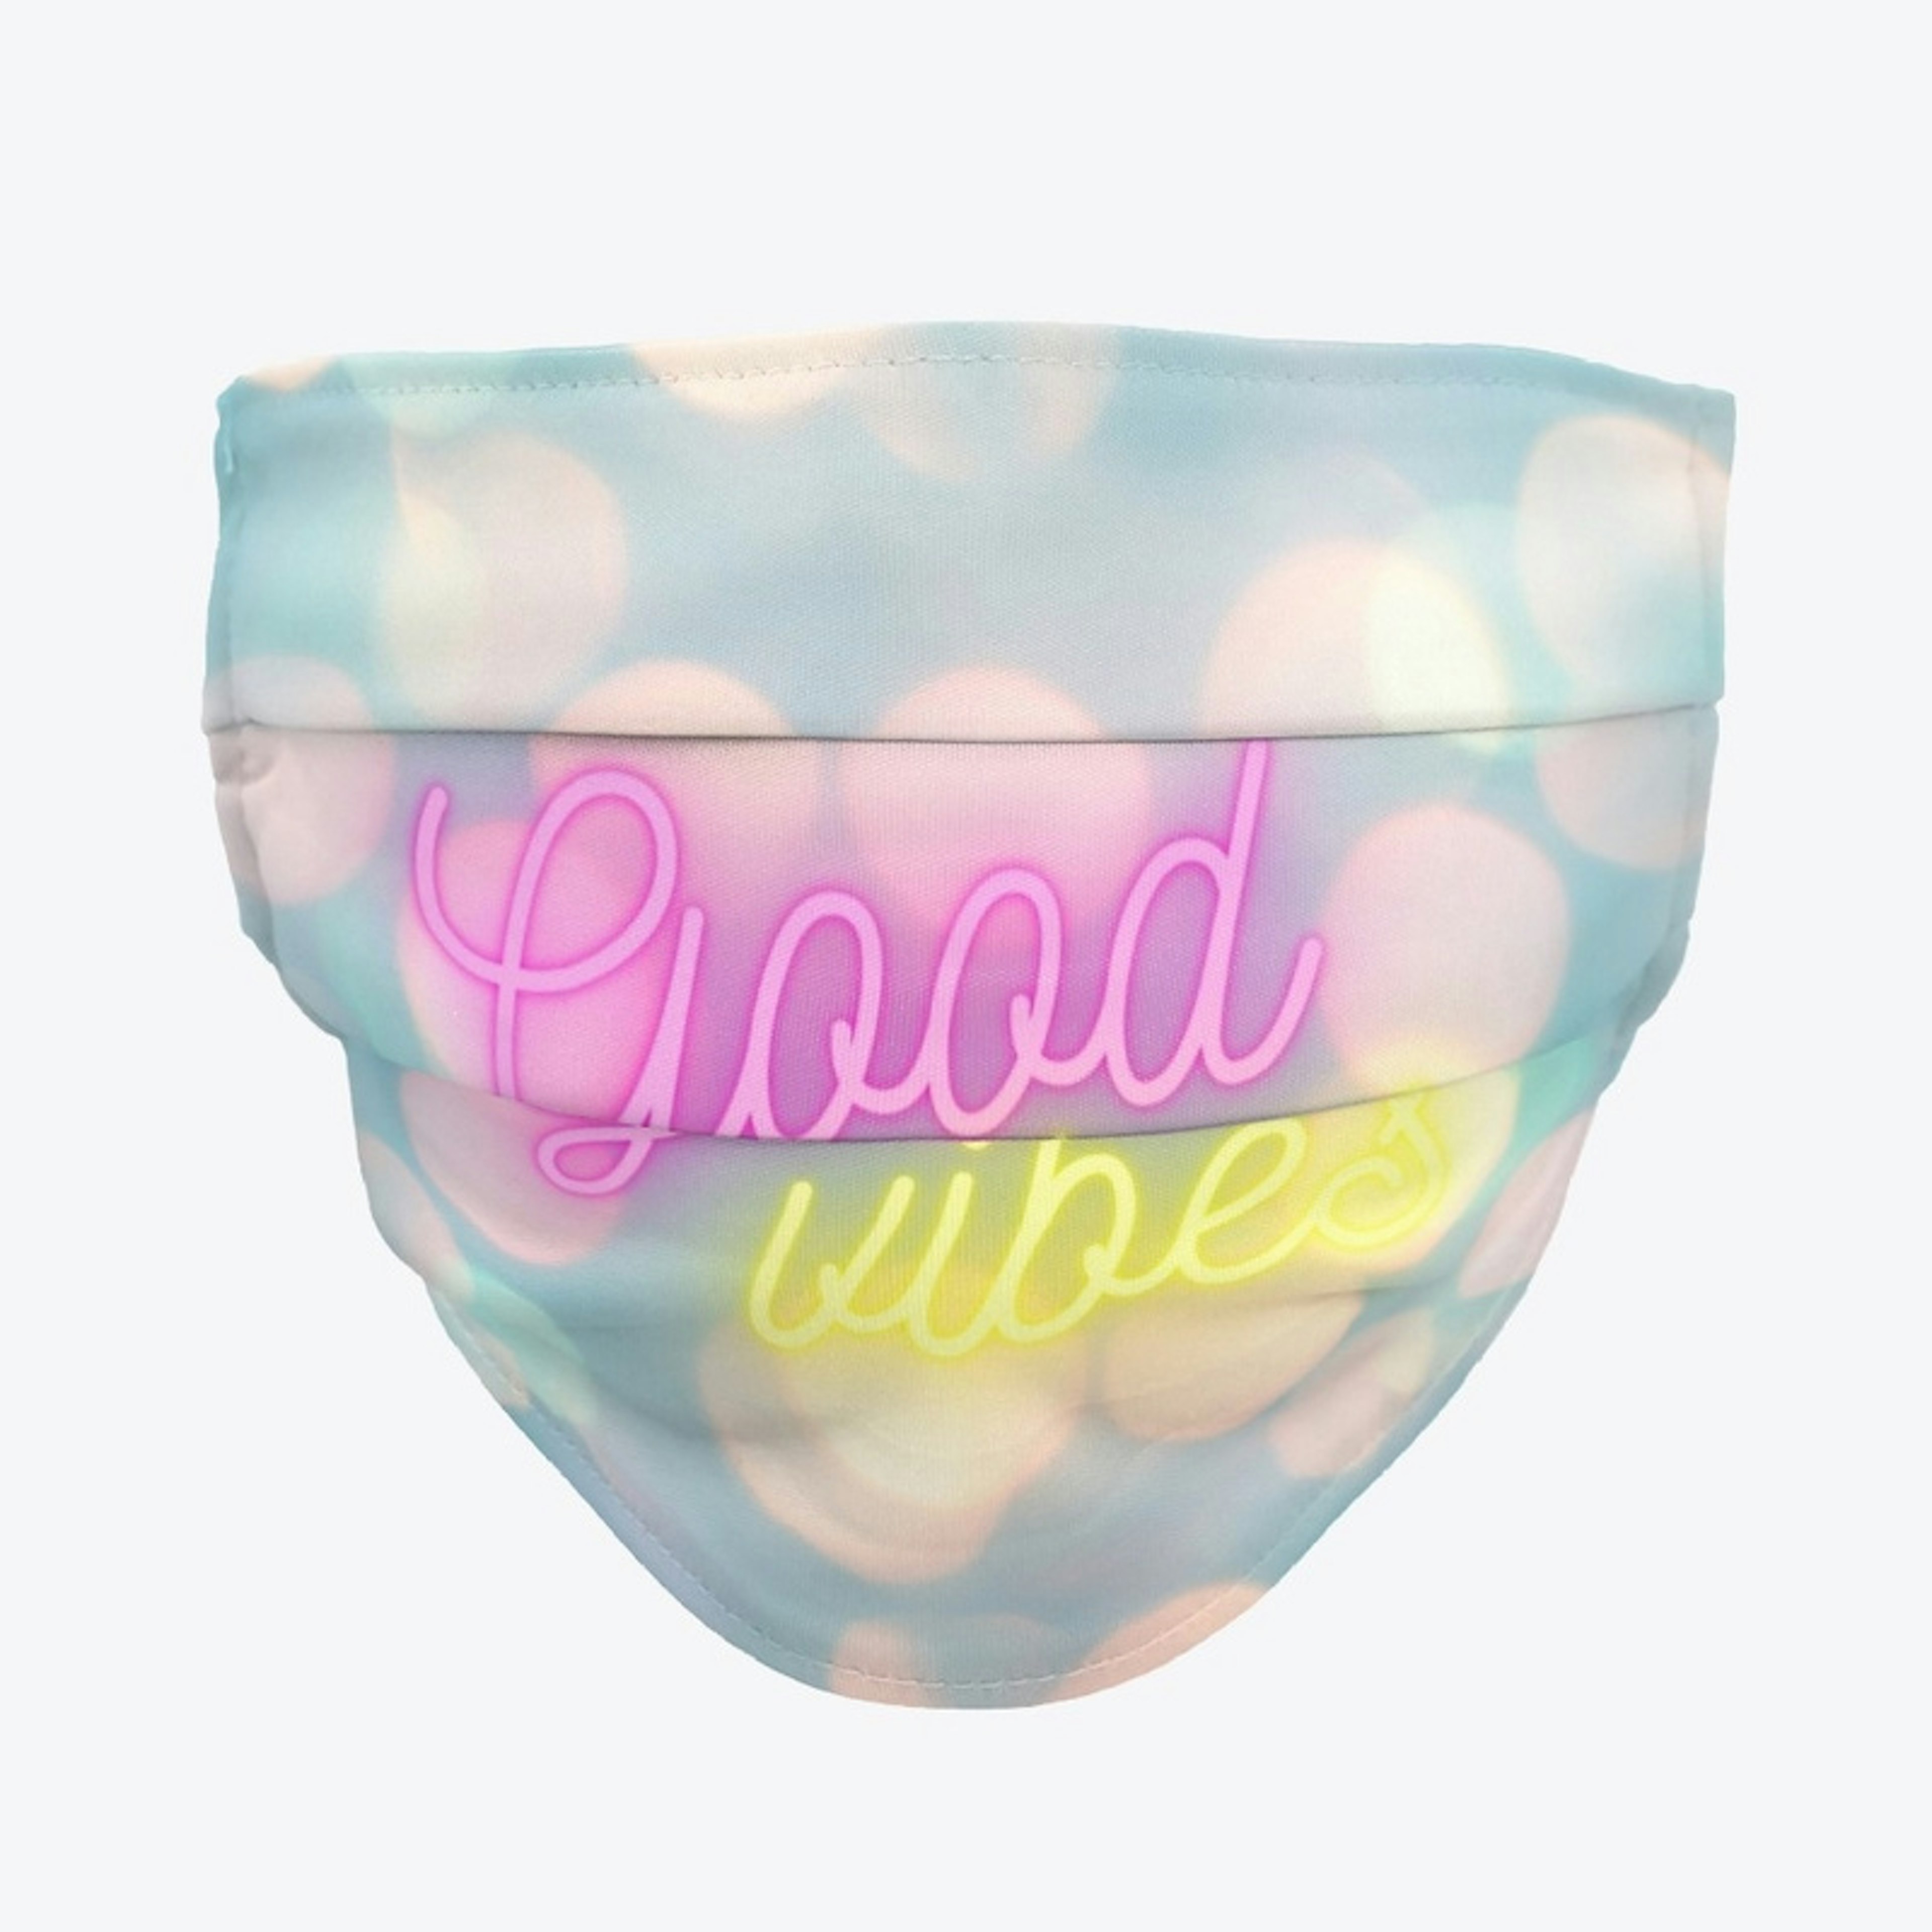 Good Vibes Glow Face Mask